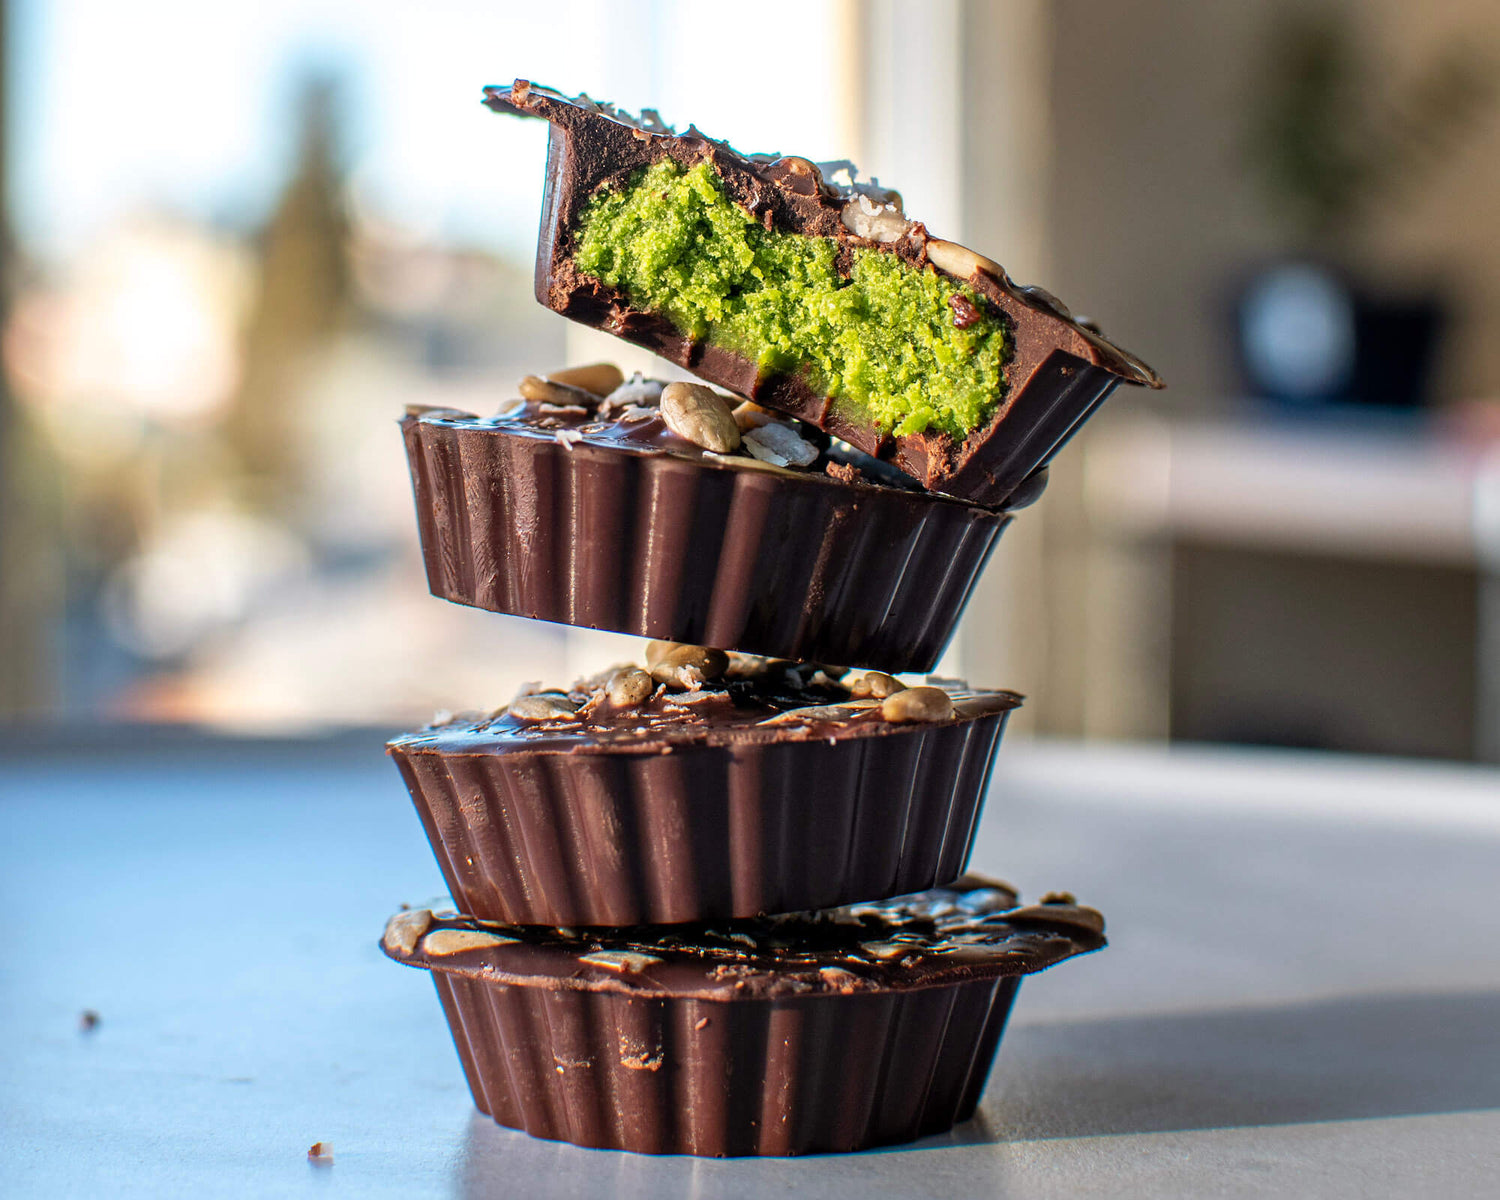 Chocolate Matcha Cups with Sprouted Sunflower Seeds